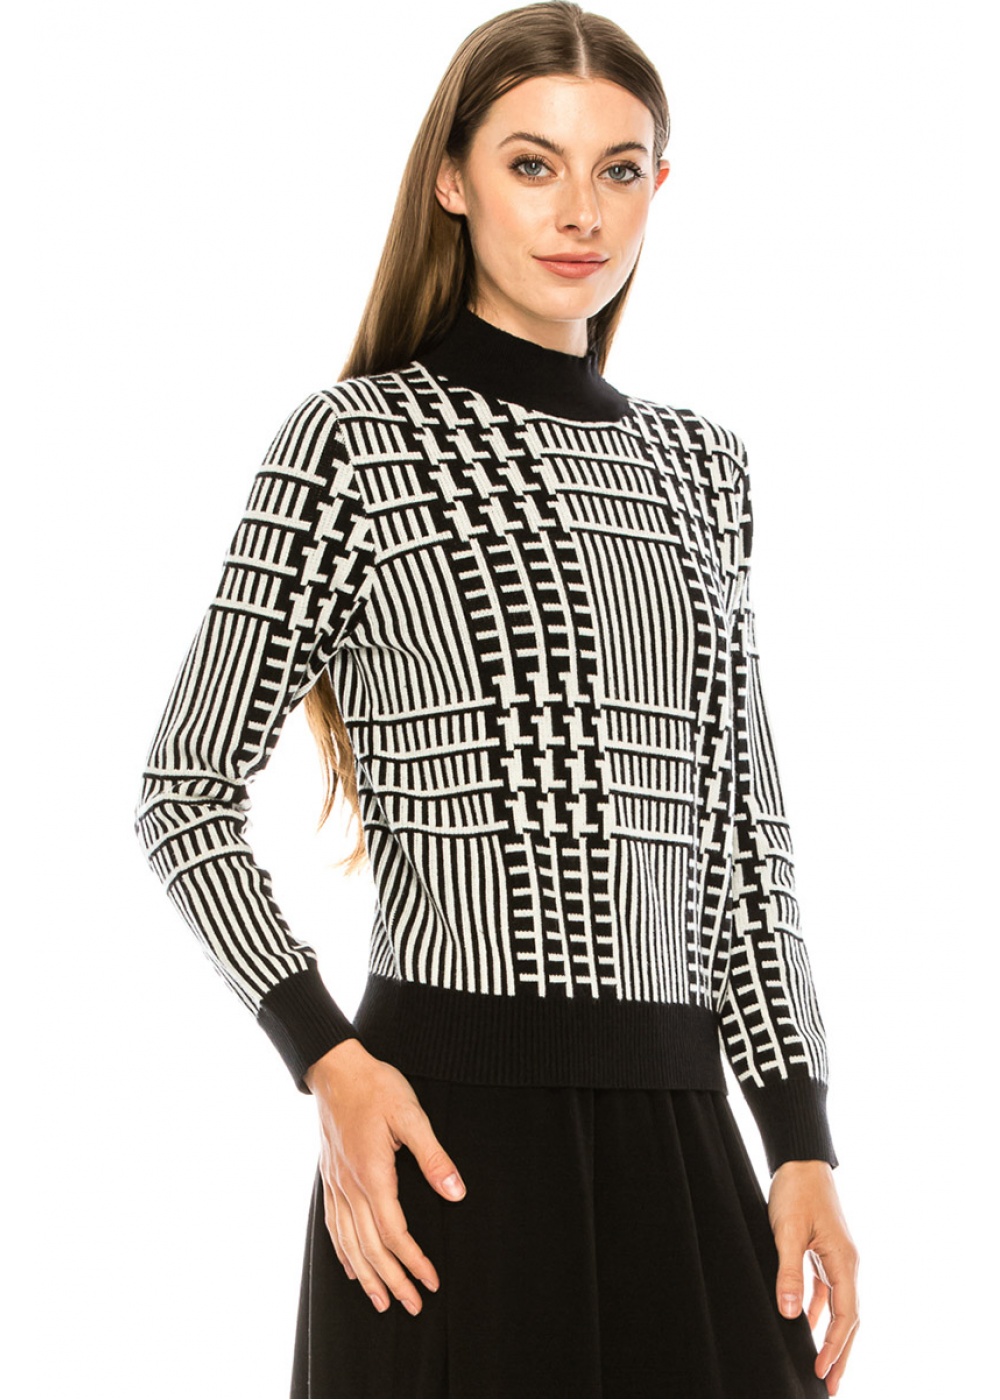 Geometric pattern sweater in black and white